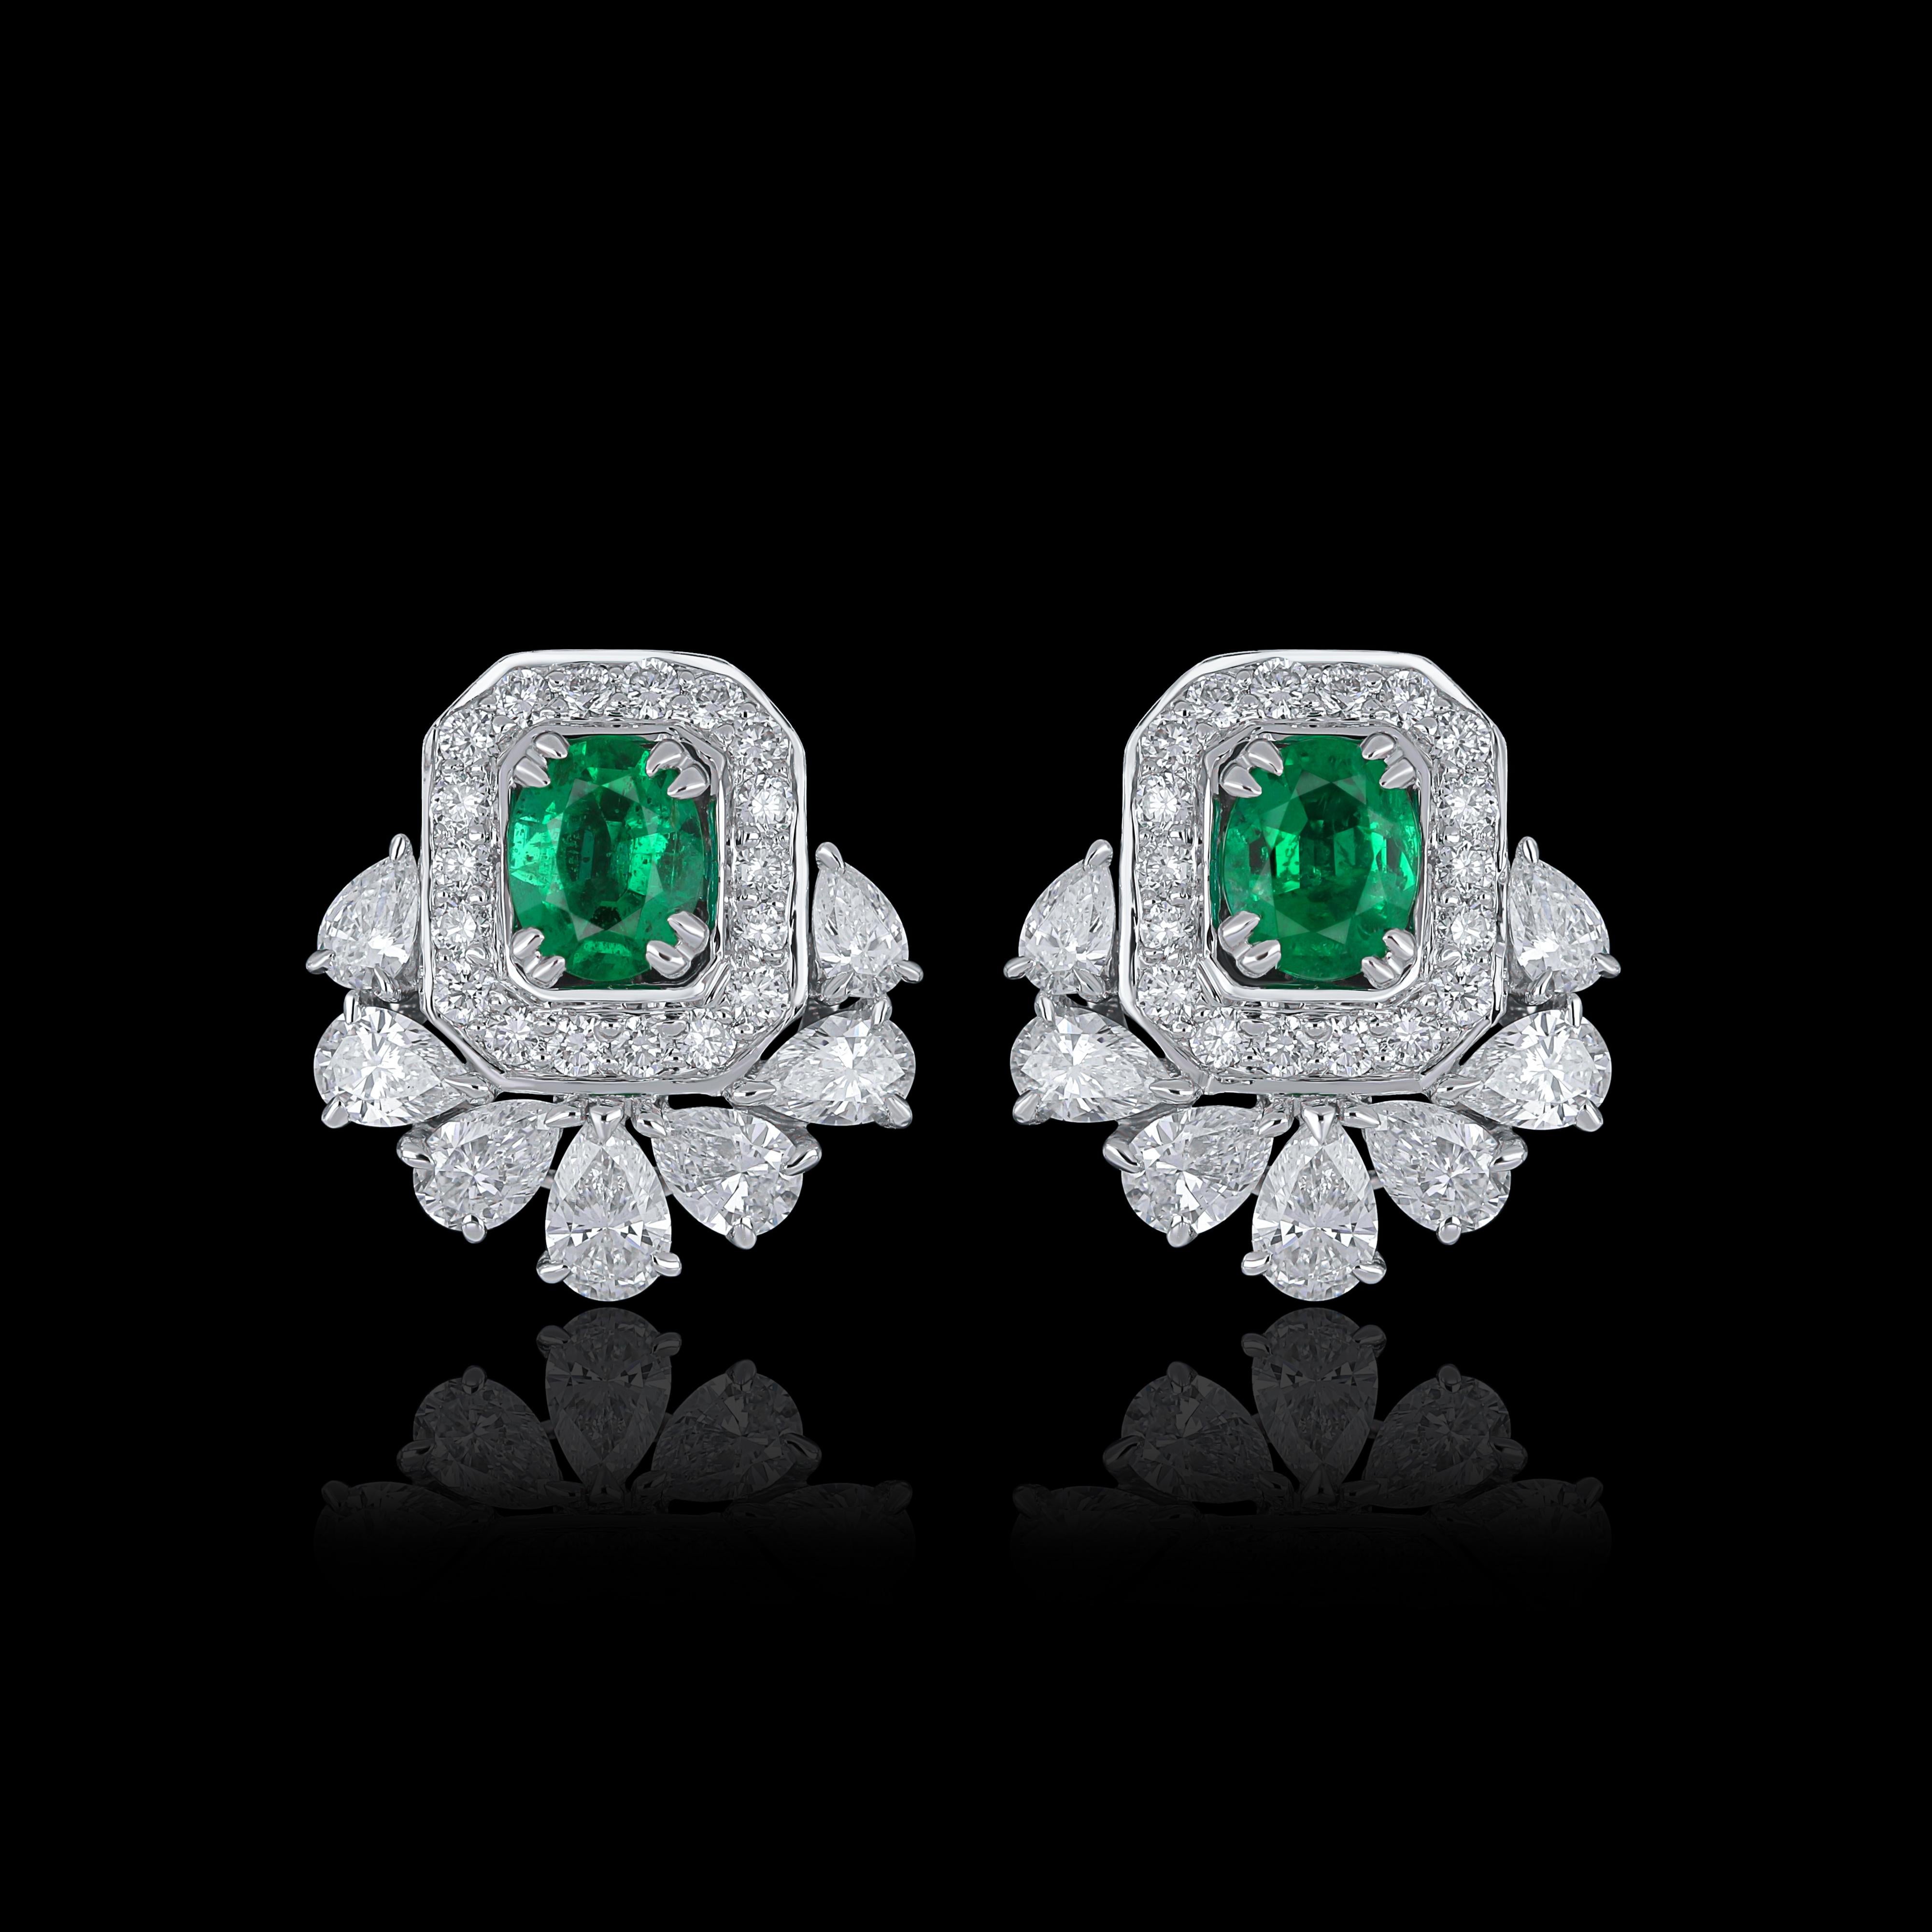 Elegant and exquisitely detailed 18 Karat White Gold Earring, center set with 0.55Cts .Oval Shape Emerald and micro pave set Diamonds, weighing approx. 1.37Cts Beautifully Hand crafted in 18 Karat White Gold.

Stone Detail:
Emerald: 5x4MM

Stone